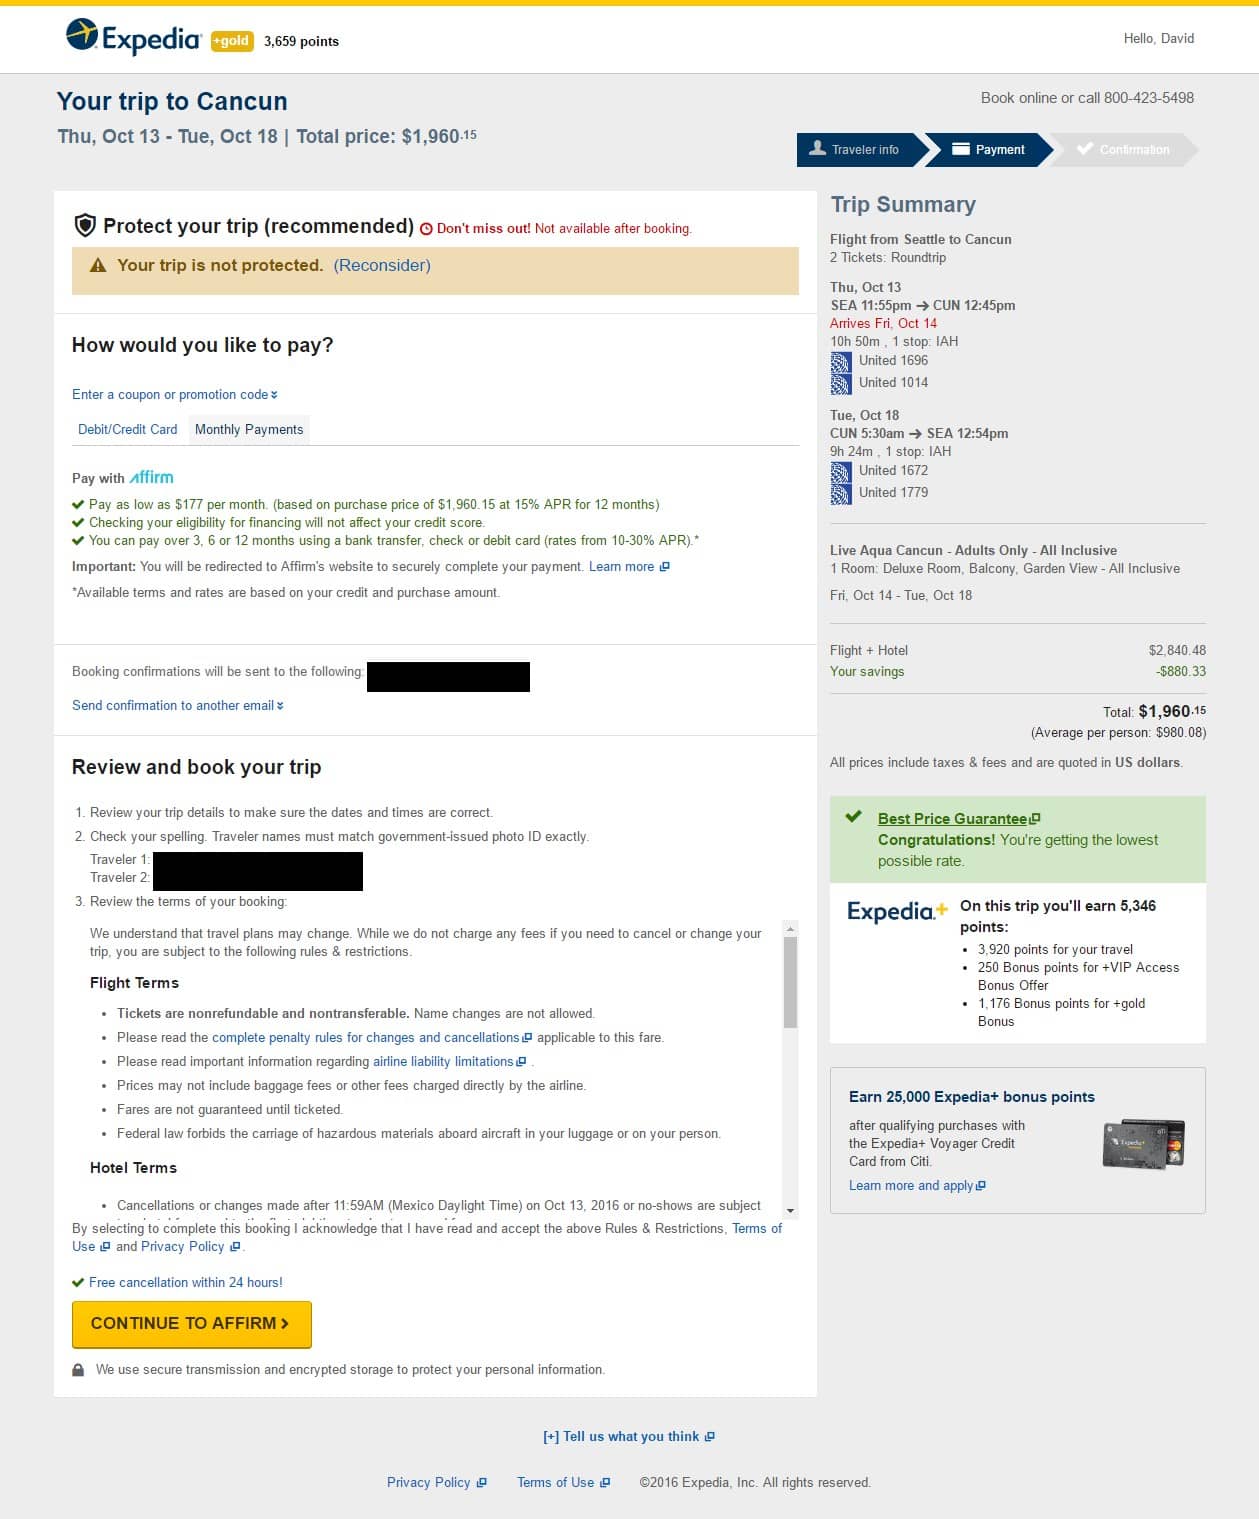 Expedia_check_out_Affirm_payment-1